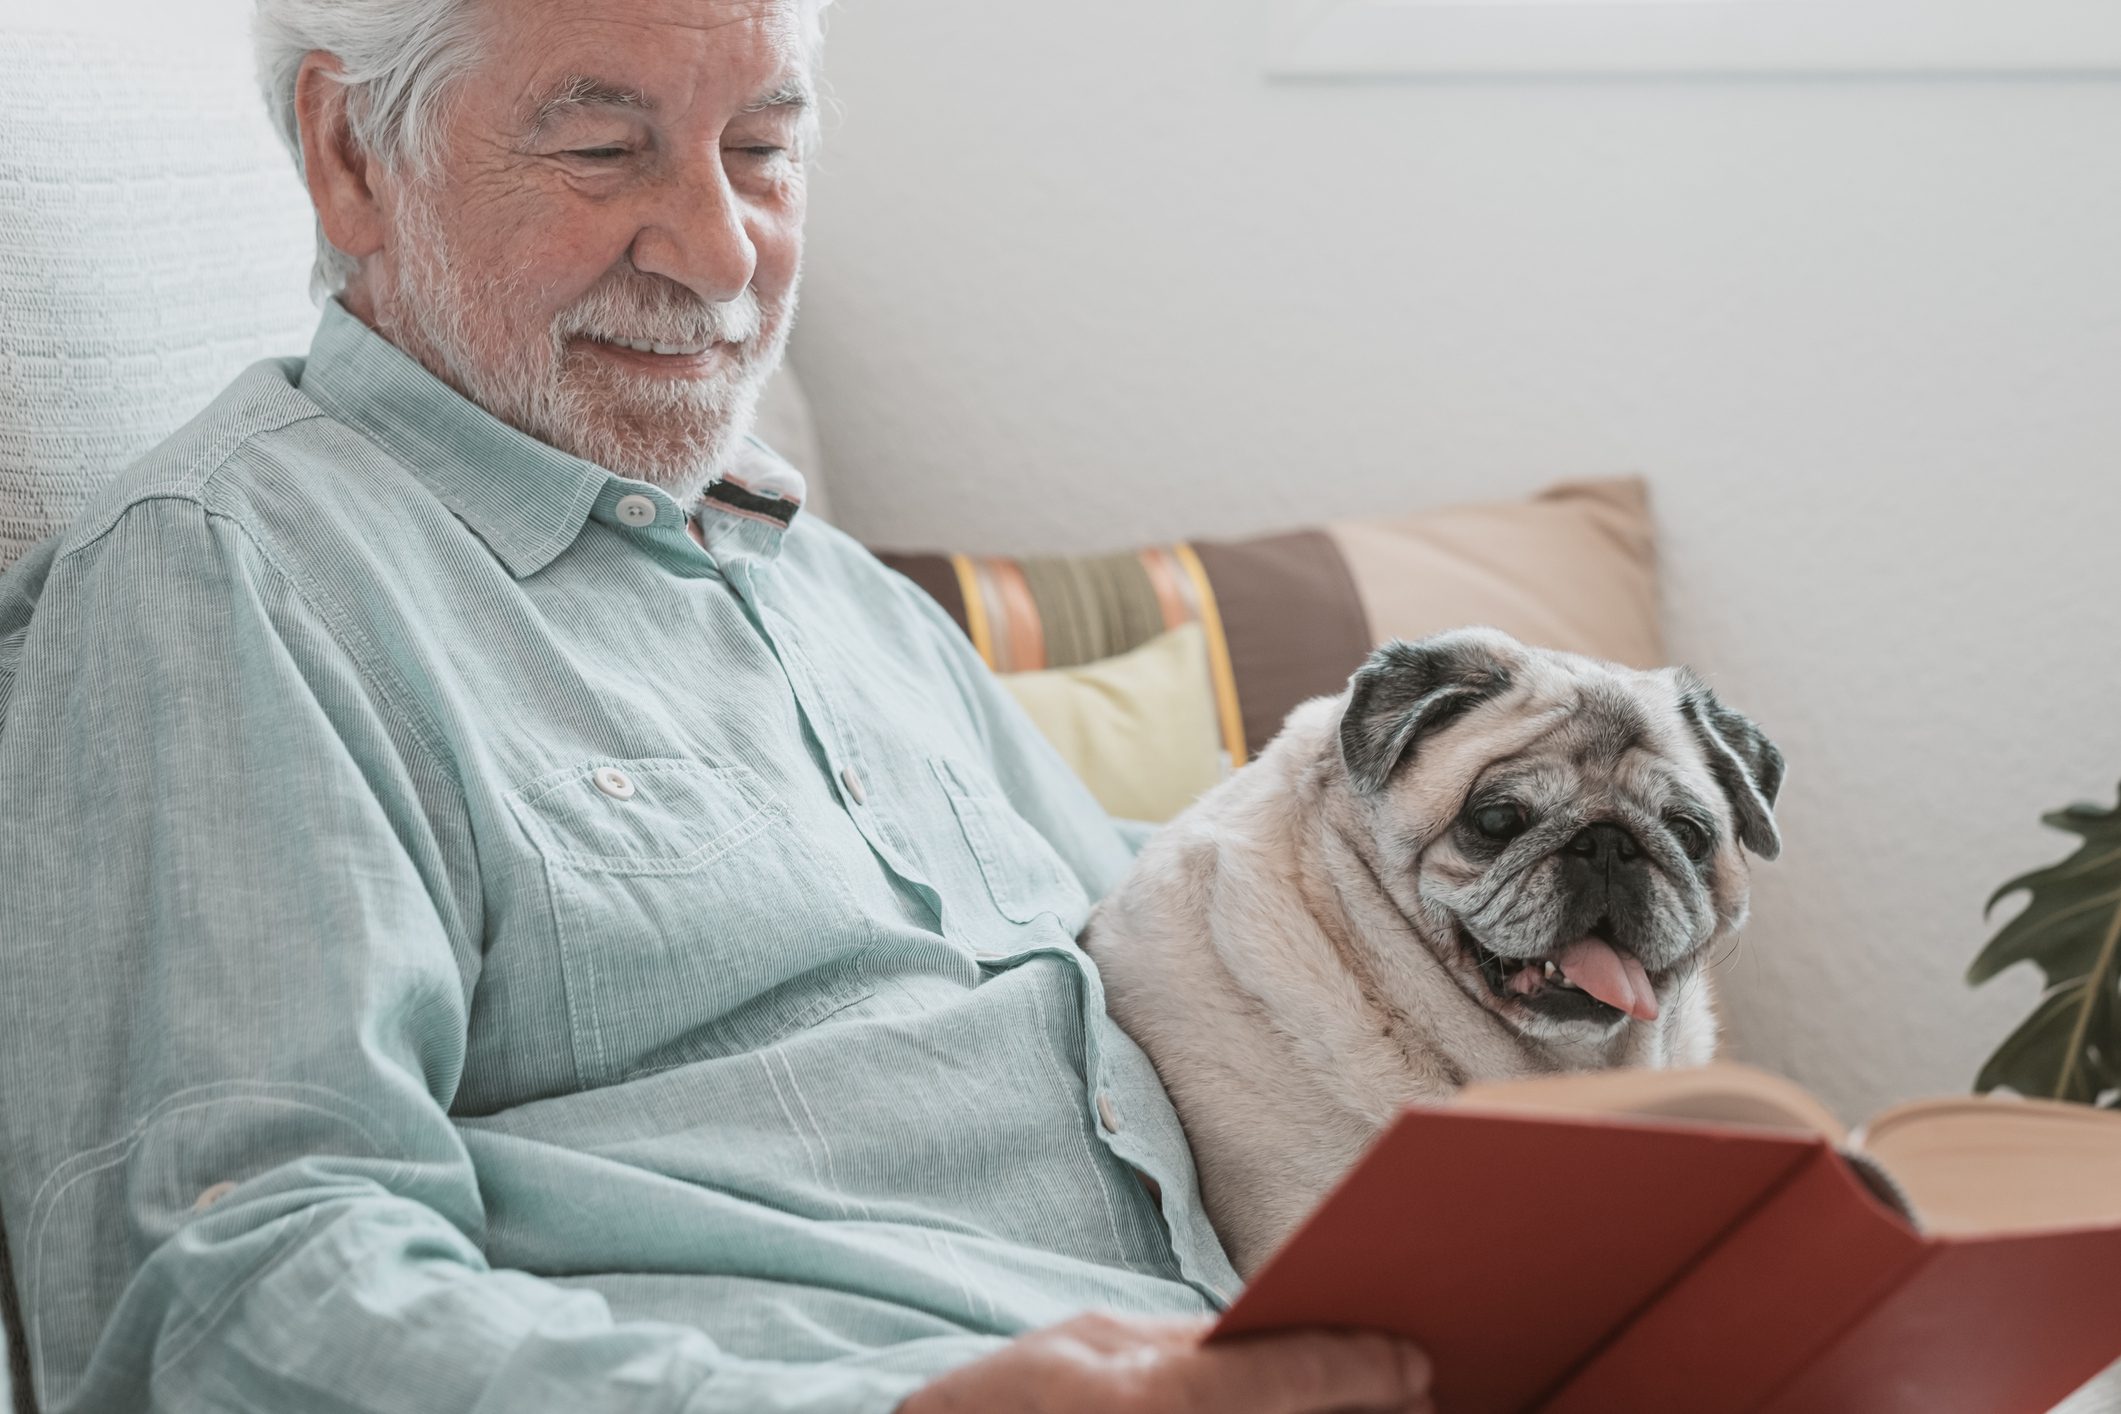 An older adult sits with his pug on a couch and reads a book